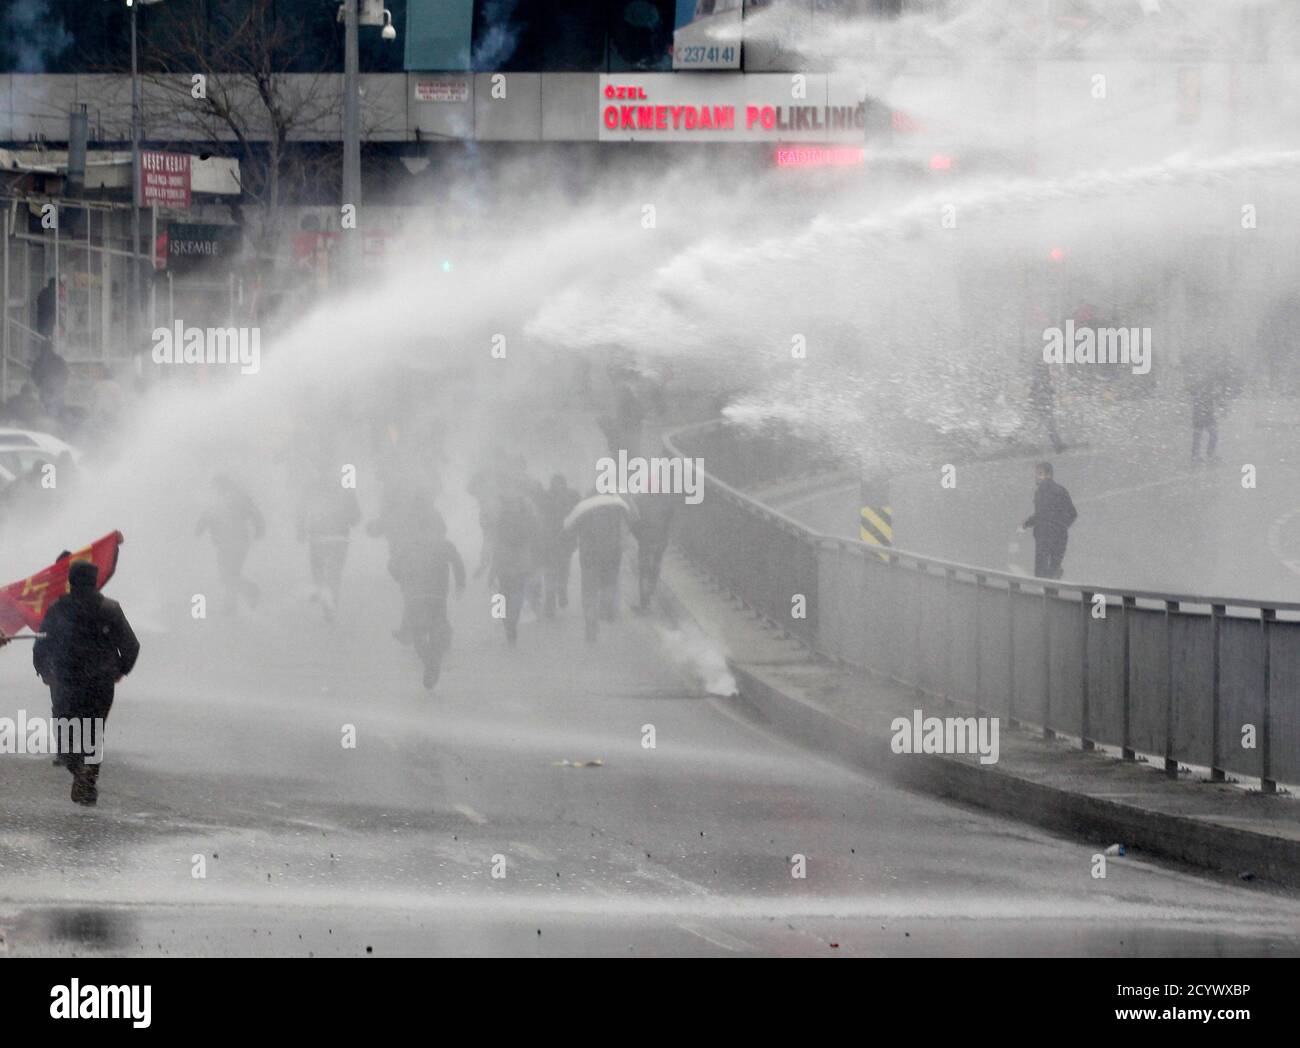 Protesters run from water cannons used by riot police to disperse them during a protest march to commemorate the death of Berkin Elvan, in Istanbul March 11, 2015. Riot police fired water cannons to disperse protesters in Istanbul as they marched to mark the anniversary of the death of Elvan, the 15-year-old boy who suffered a head injury during anti-government protests in Istanbul in 2012, dying on March 11, 2013 after spending months in a coma.   REUTERS/Osman Orsal (TURKEY - Tags: POLITICS CIVIL UNREST CRIME LAW) Stock Photo